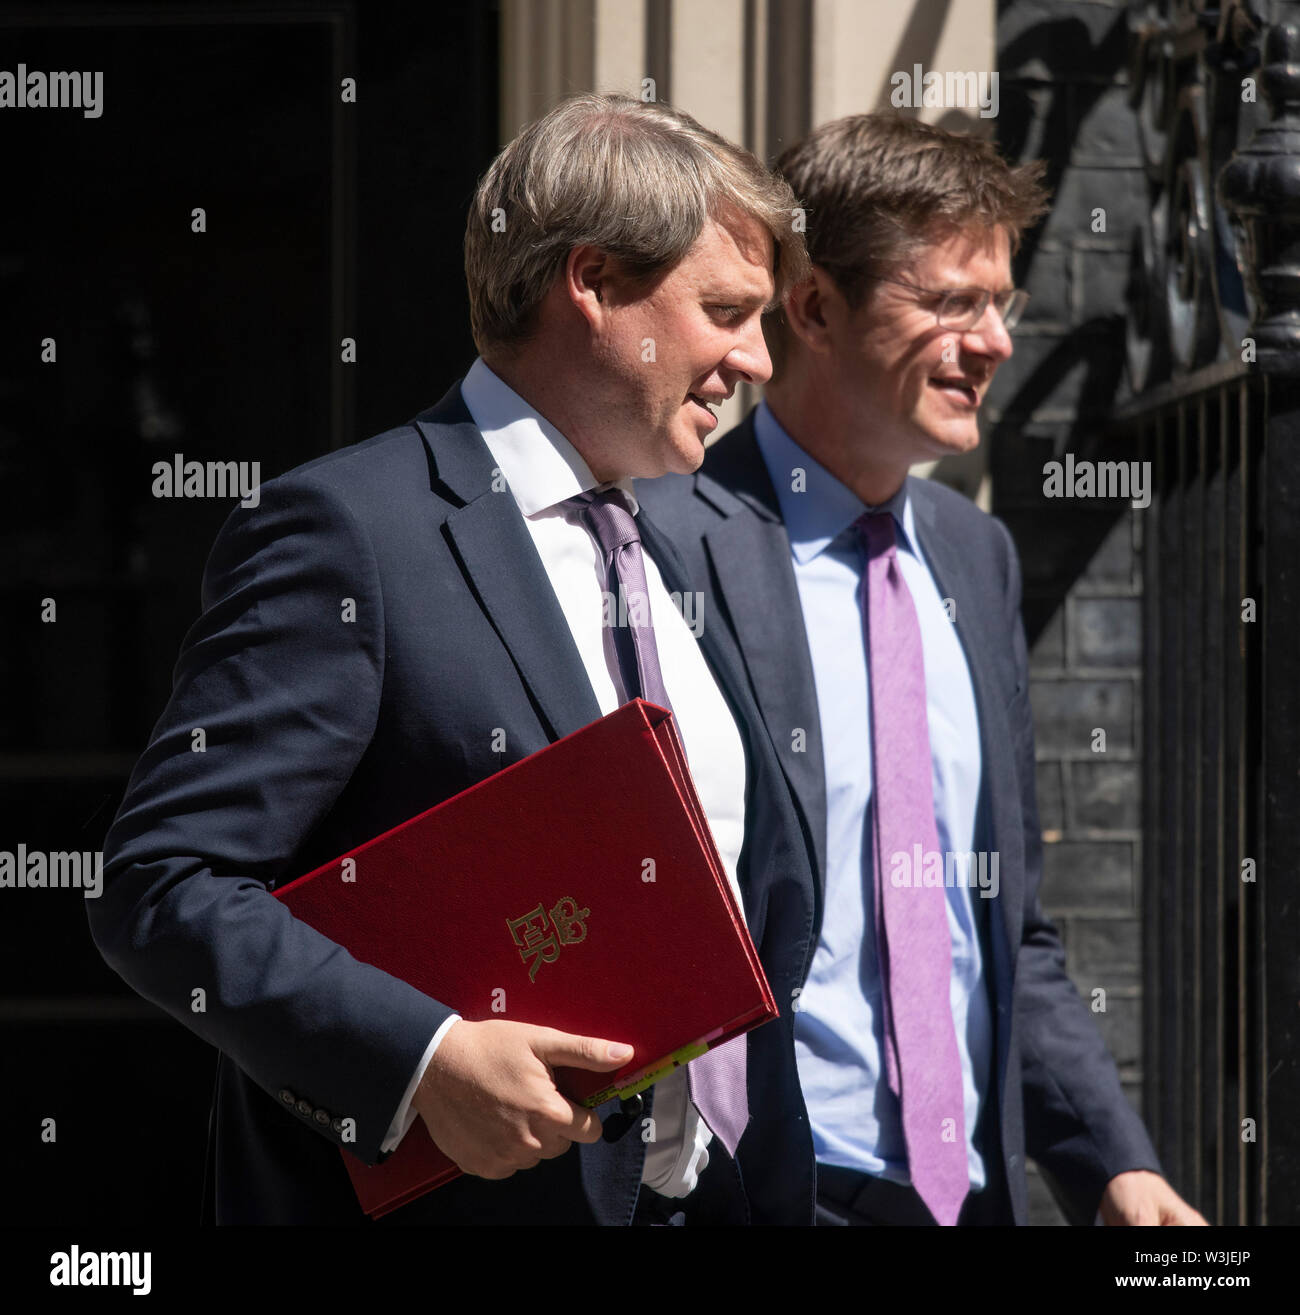 Downing Street, London, UK. 16th July 2019. Government Ministers leave Downing Street after weekly cabinet meeting. Chris Skidmore (left), Minister of State for Universities, Science, Research and Innovation, leaves with Greg Clark, Business and Energy Secretary. Credit: Malcolm Park/Alamy Live News. Stock Photo